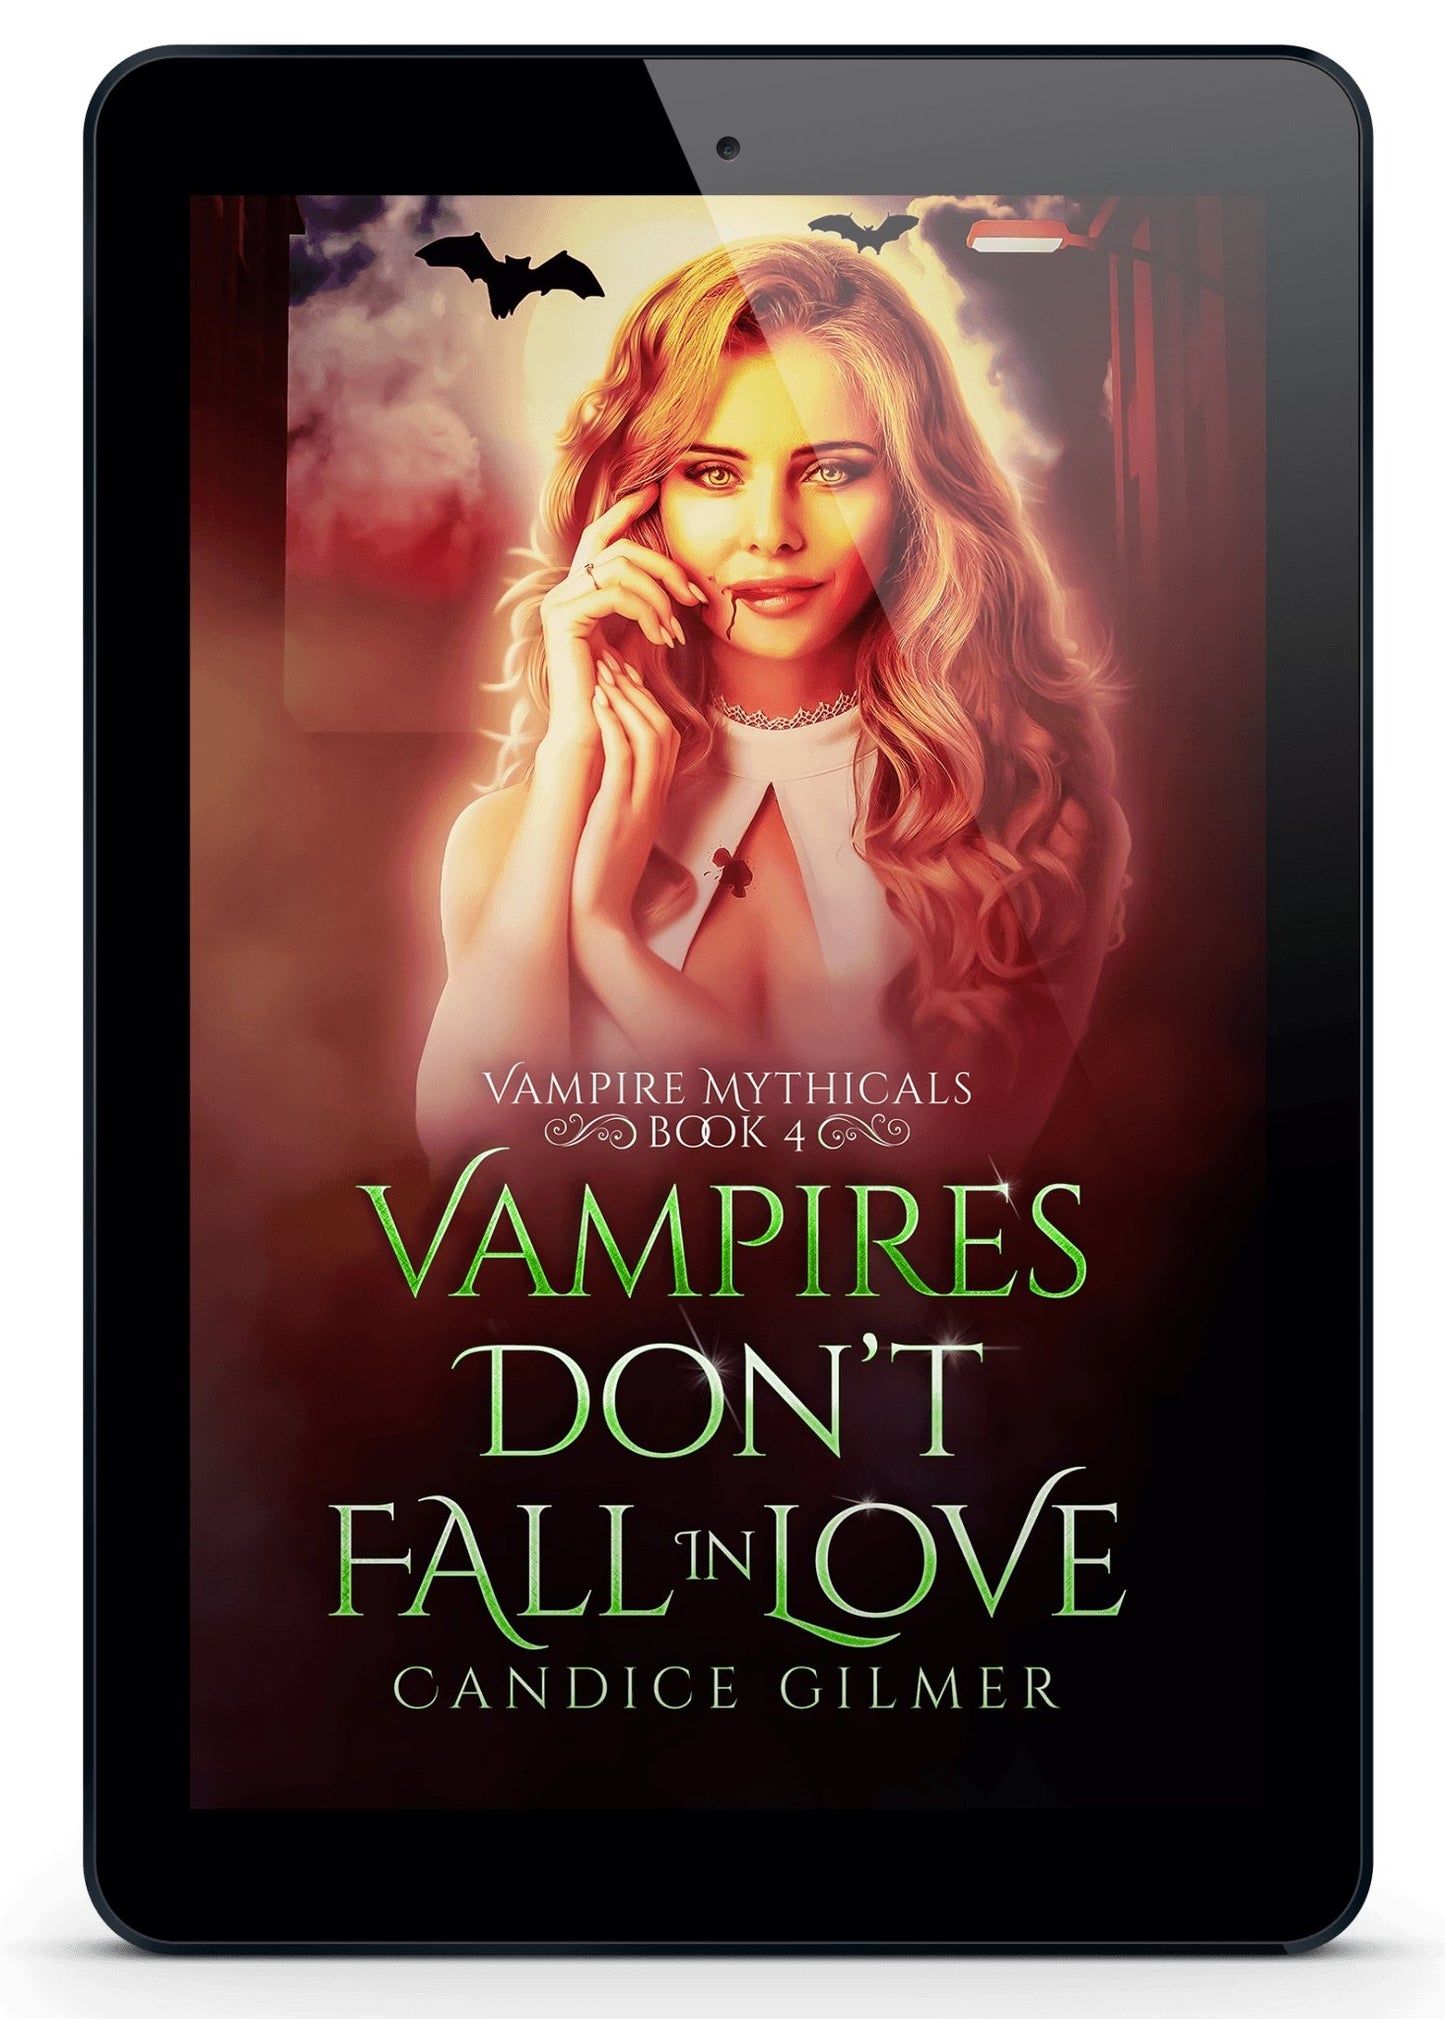 Vampires Don't Fall in Love - Candice Gilmer Books